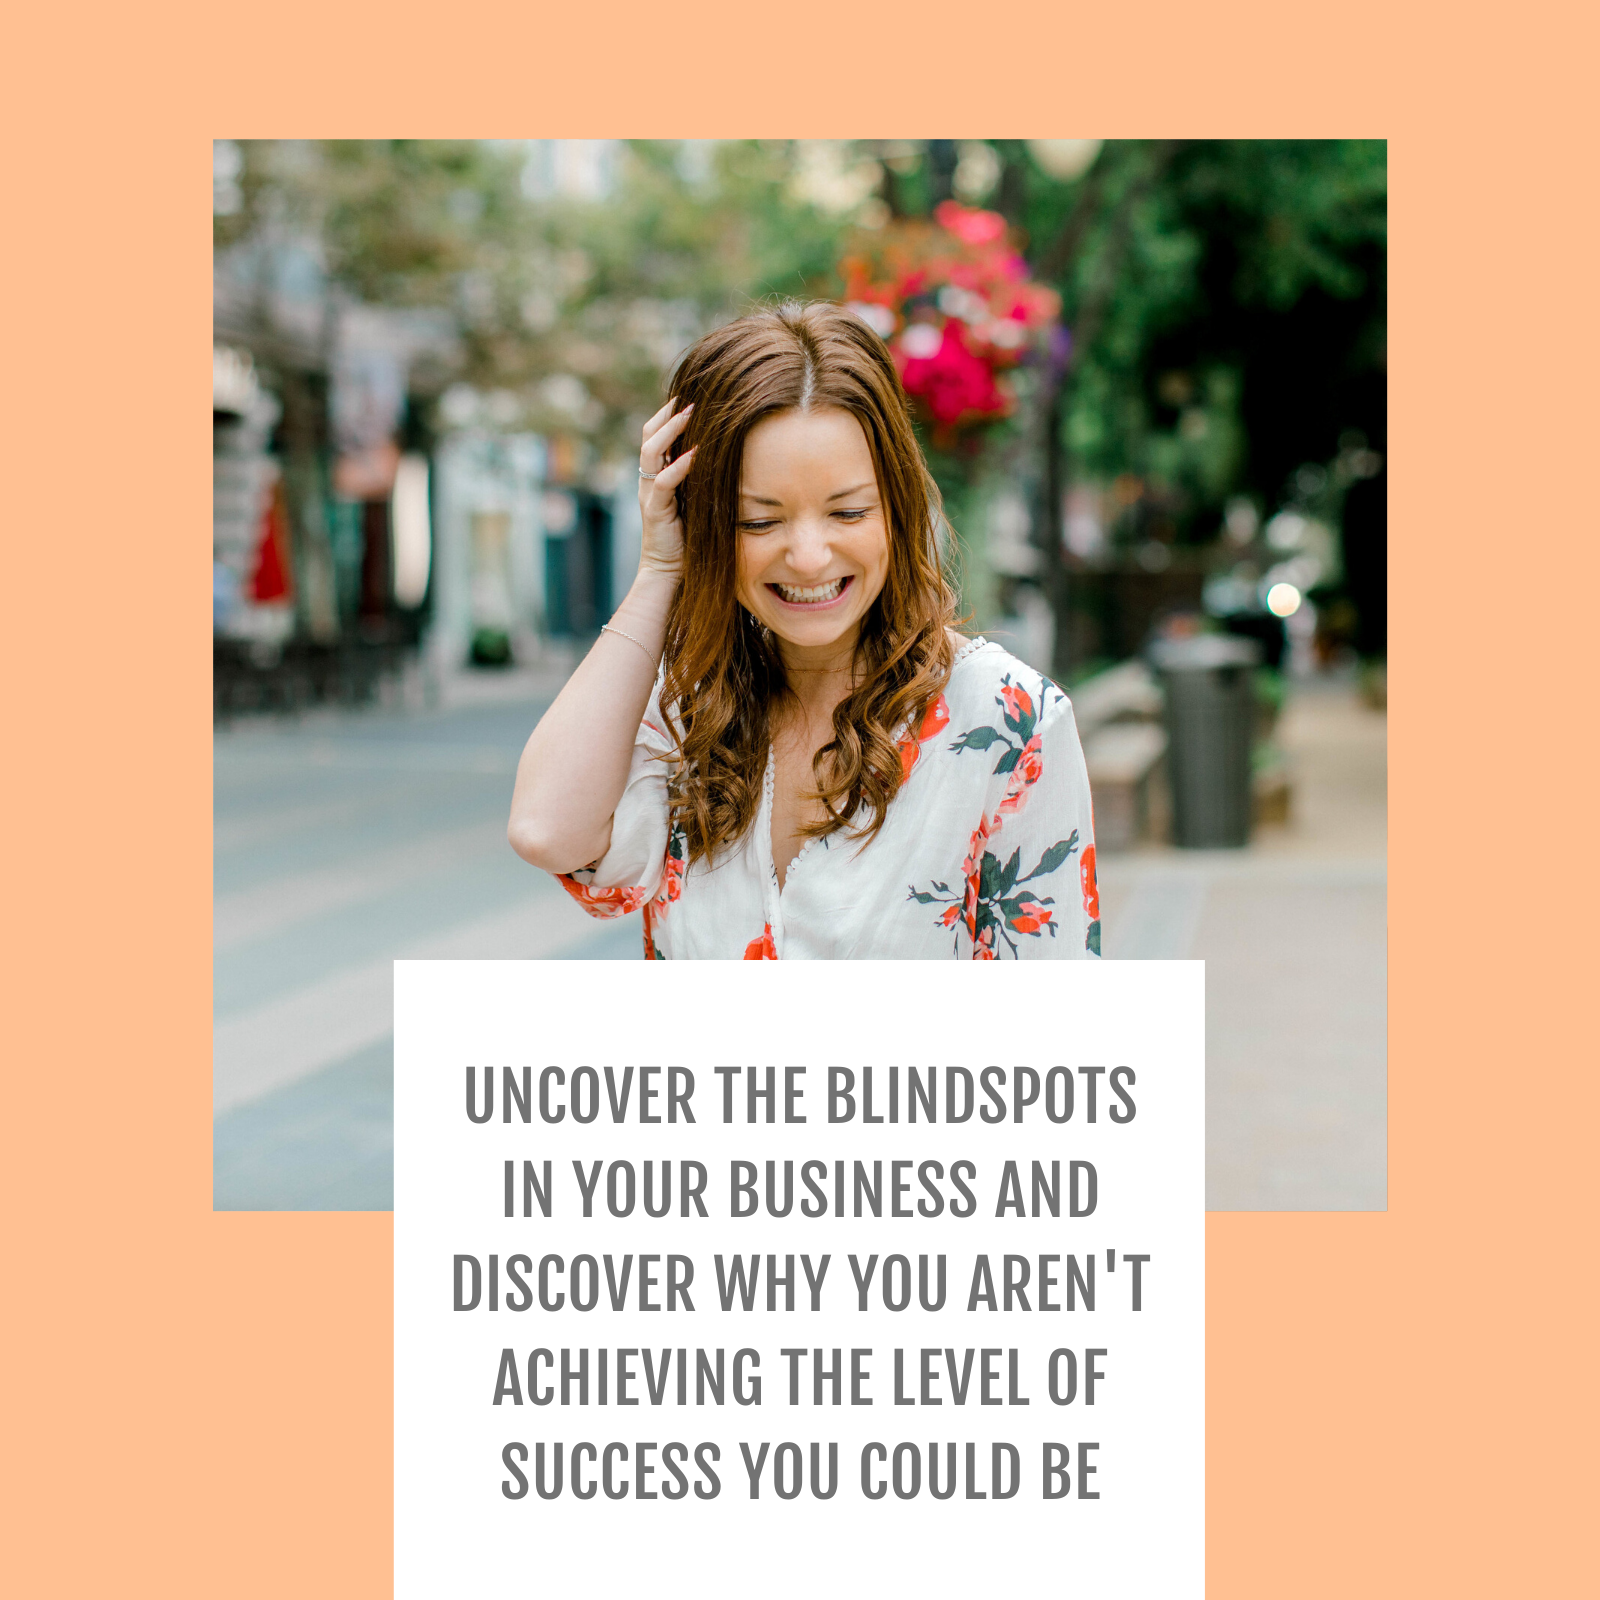 Episode #005: Uncover the blindspots in your business and discover why you aren't achieving the level of success you could be.